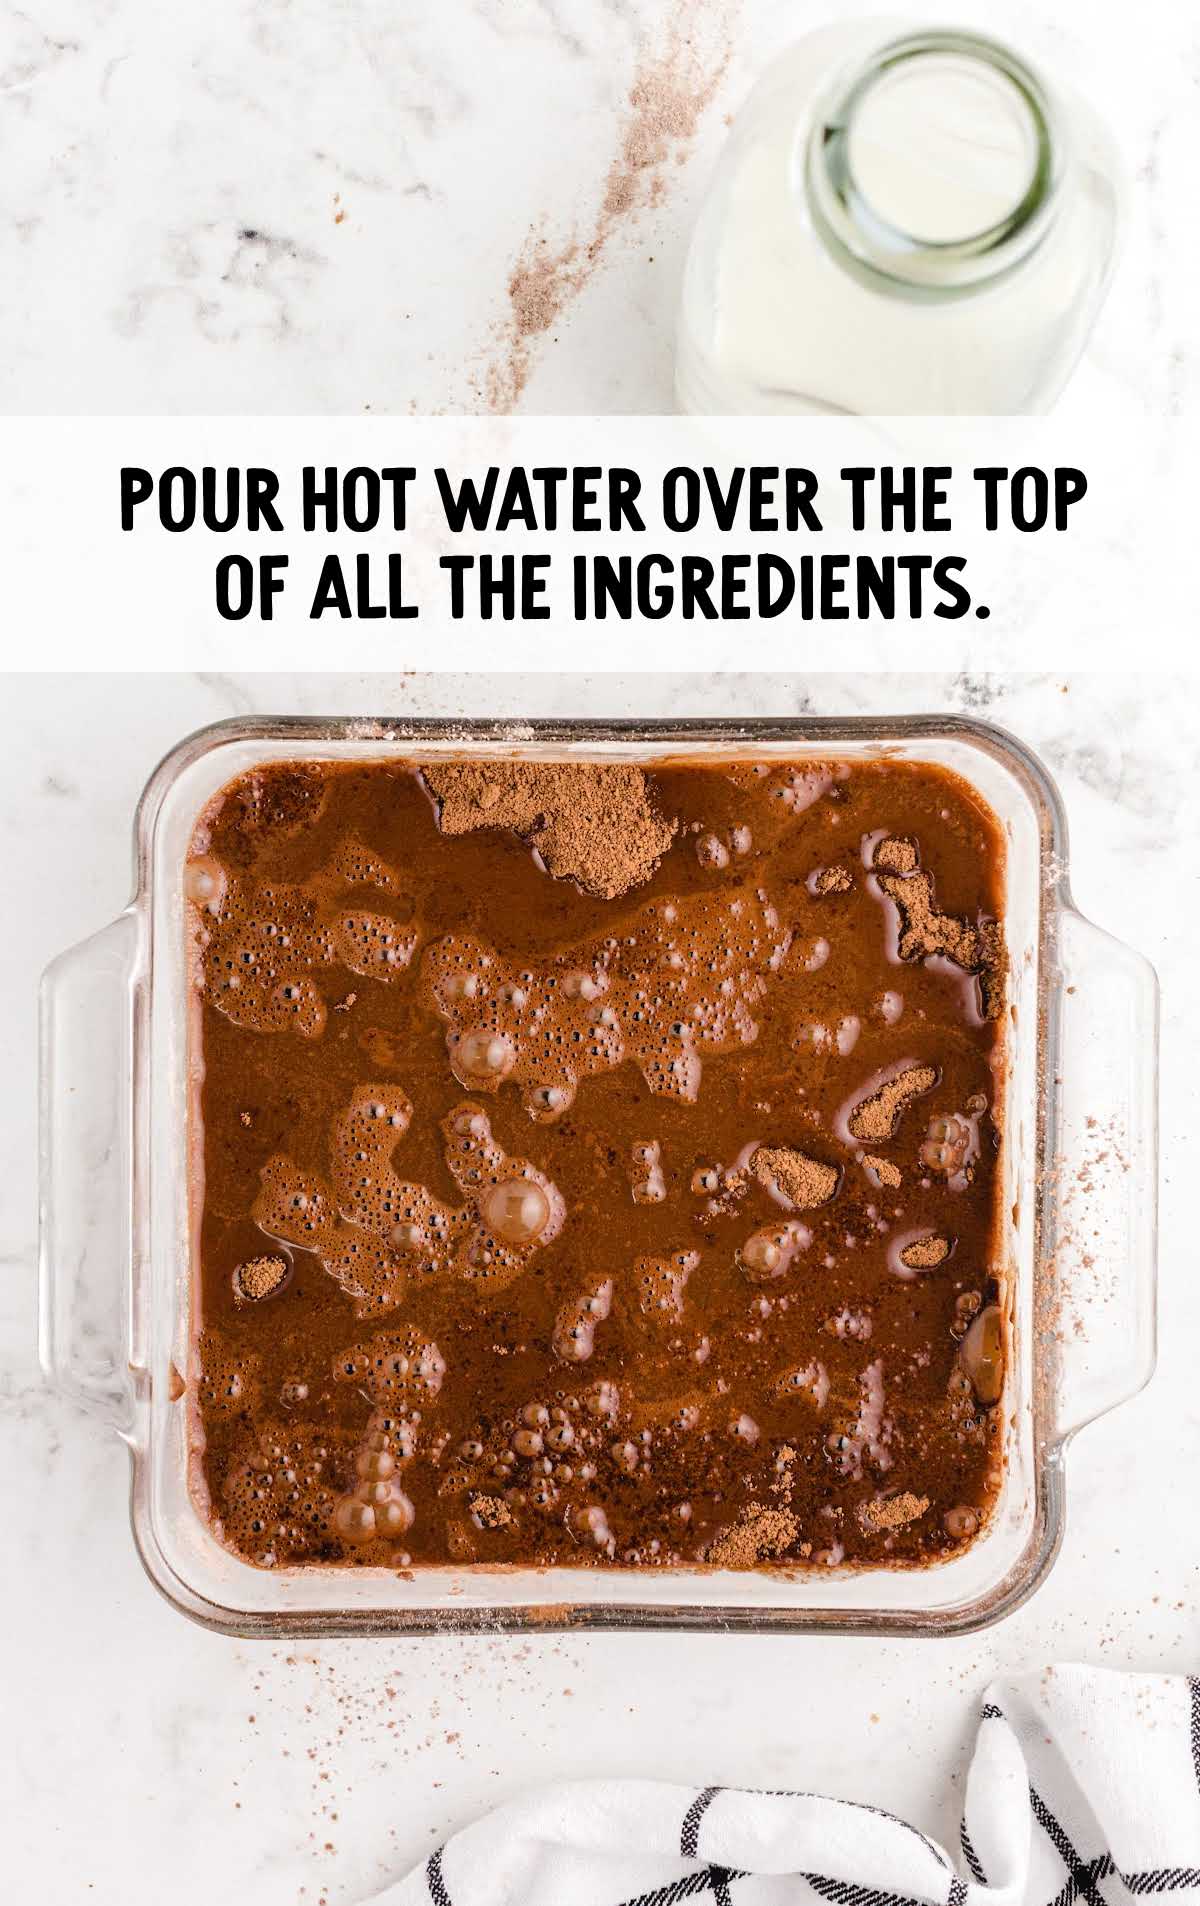 hot water poured on top of the ingredients in the baking dish